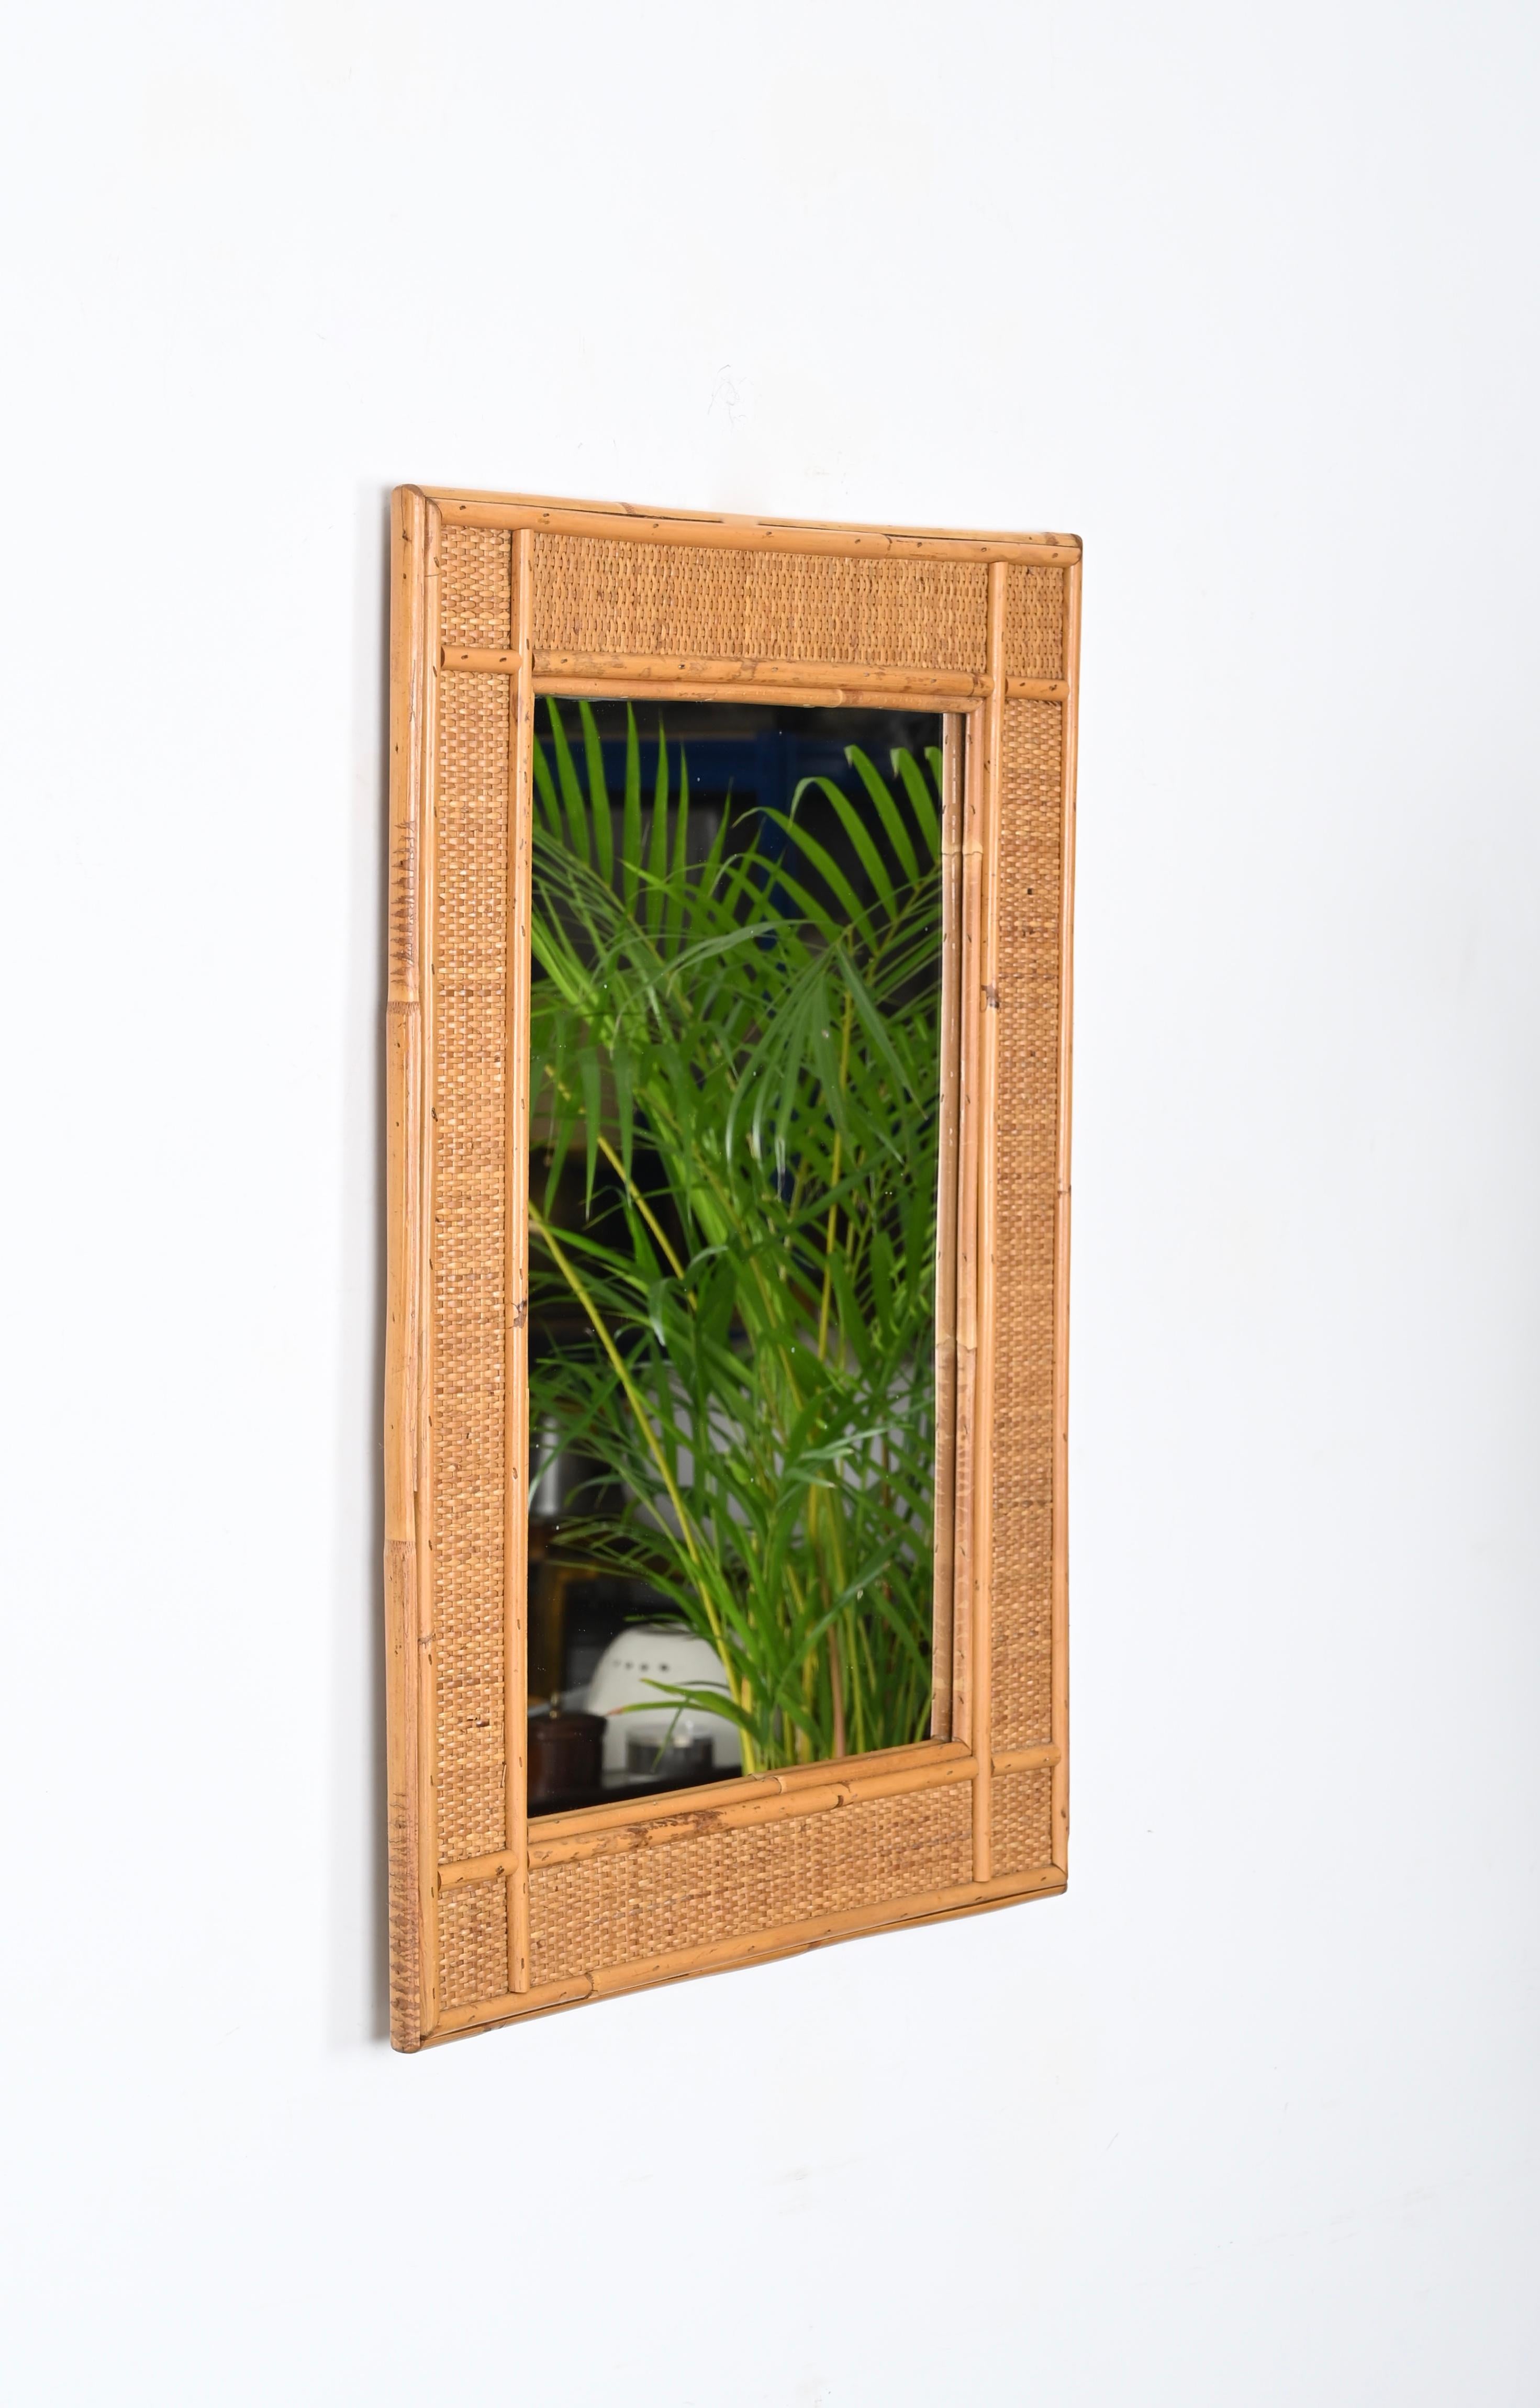 Midcentury Rectangular  Bamboo and Woven Rattan Wicker Mirror, Italy 1970s For Sale 6